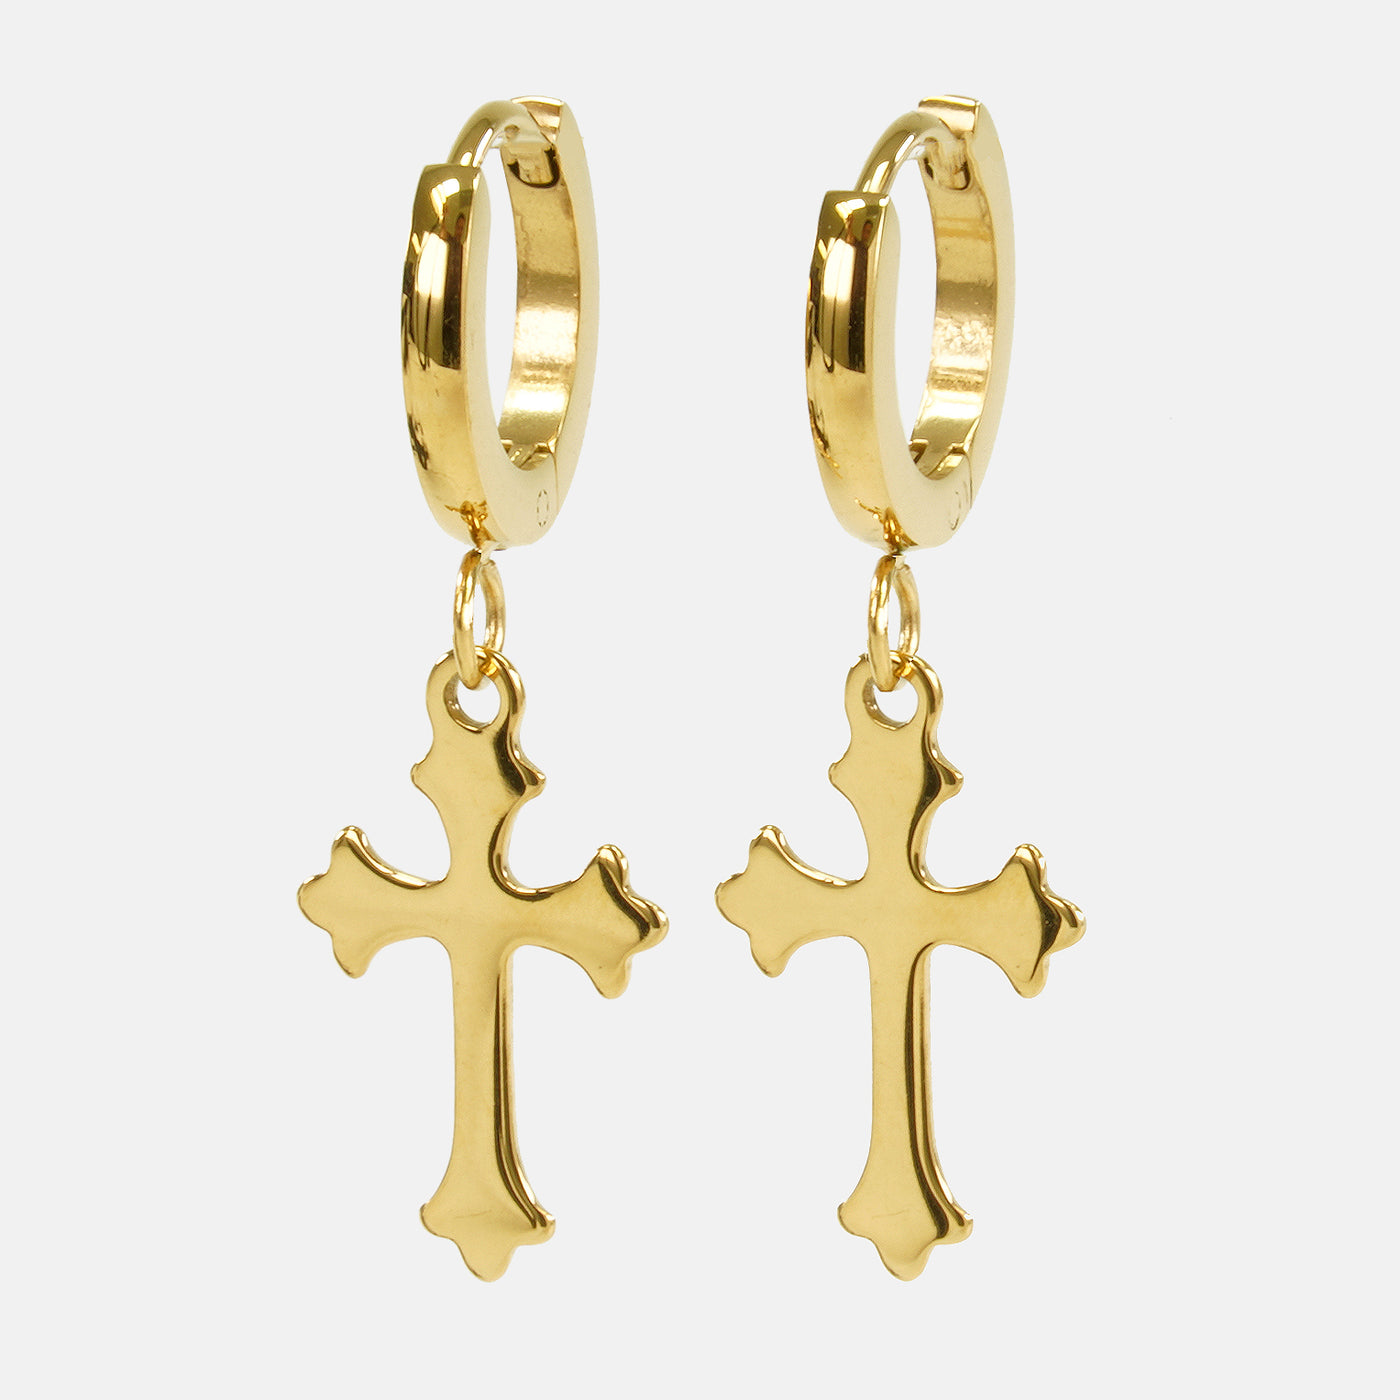 Gothic Cross Earrings - Gold Plated Stainless Steel